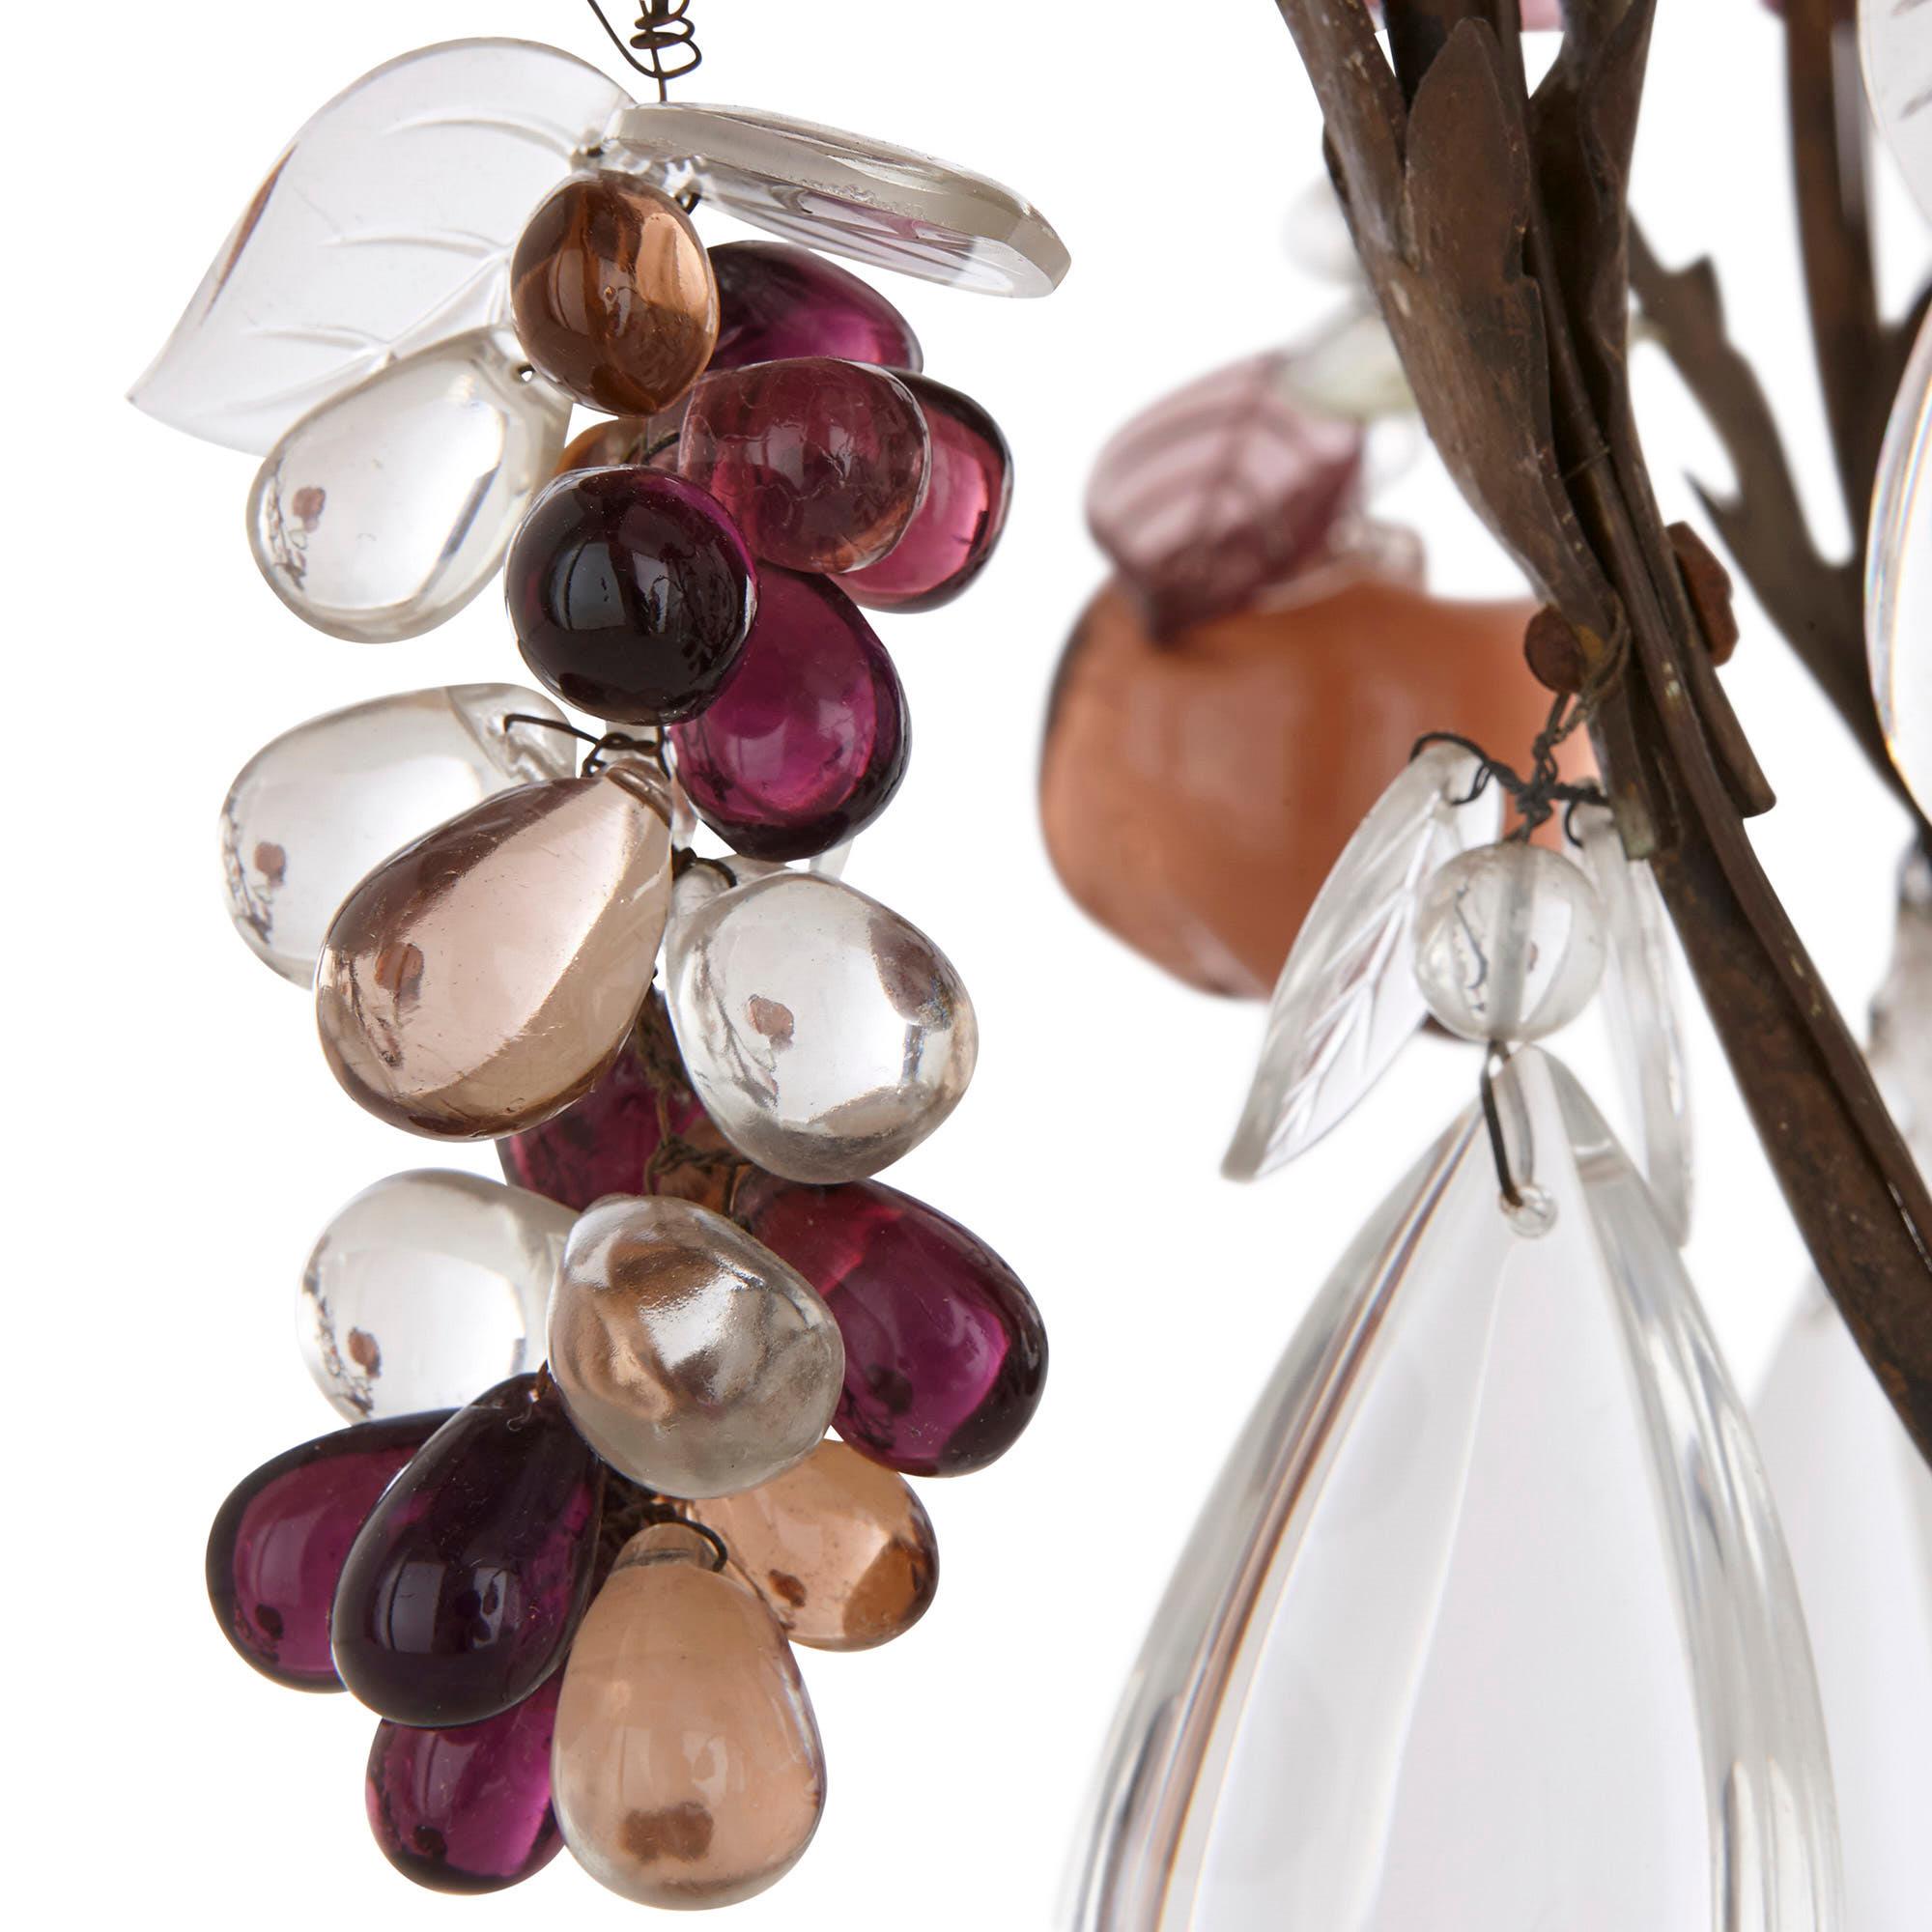 This chandelier is unique for its fruit-shaped glass, rock crystal and quartz pendants. These pink, purple, white and orange pears, apples, and grapes adorn the chandelier’s foliate metal frame. 

The chandelier features a top canopy with several